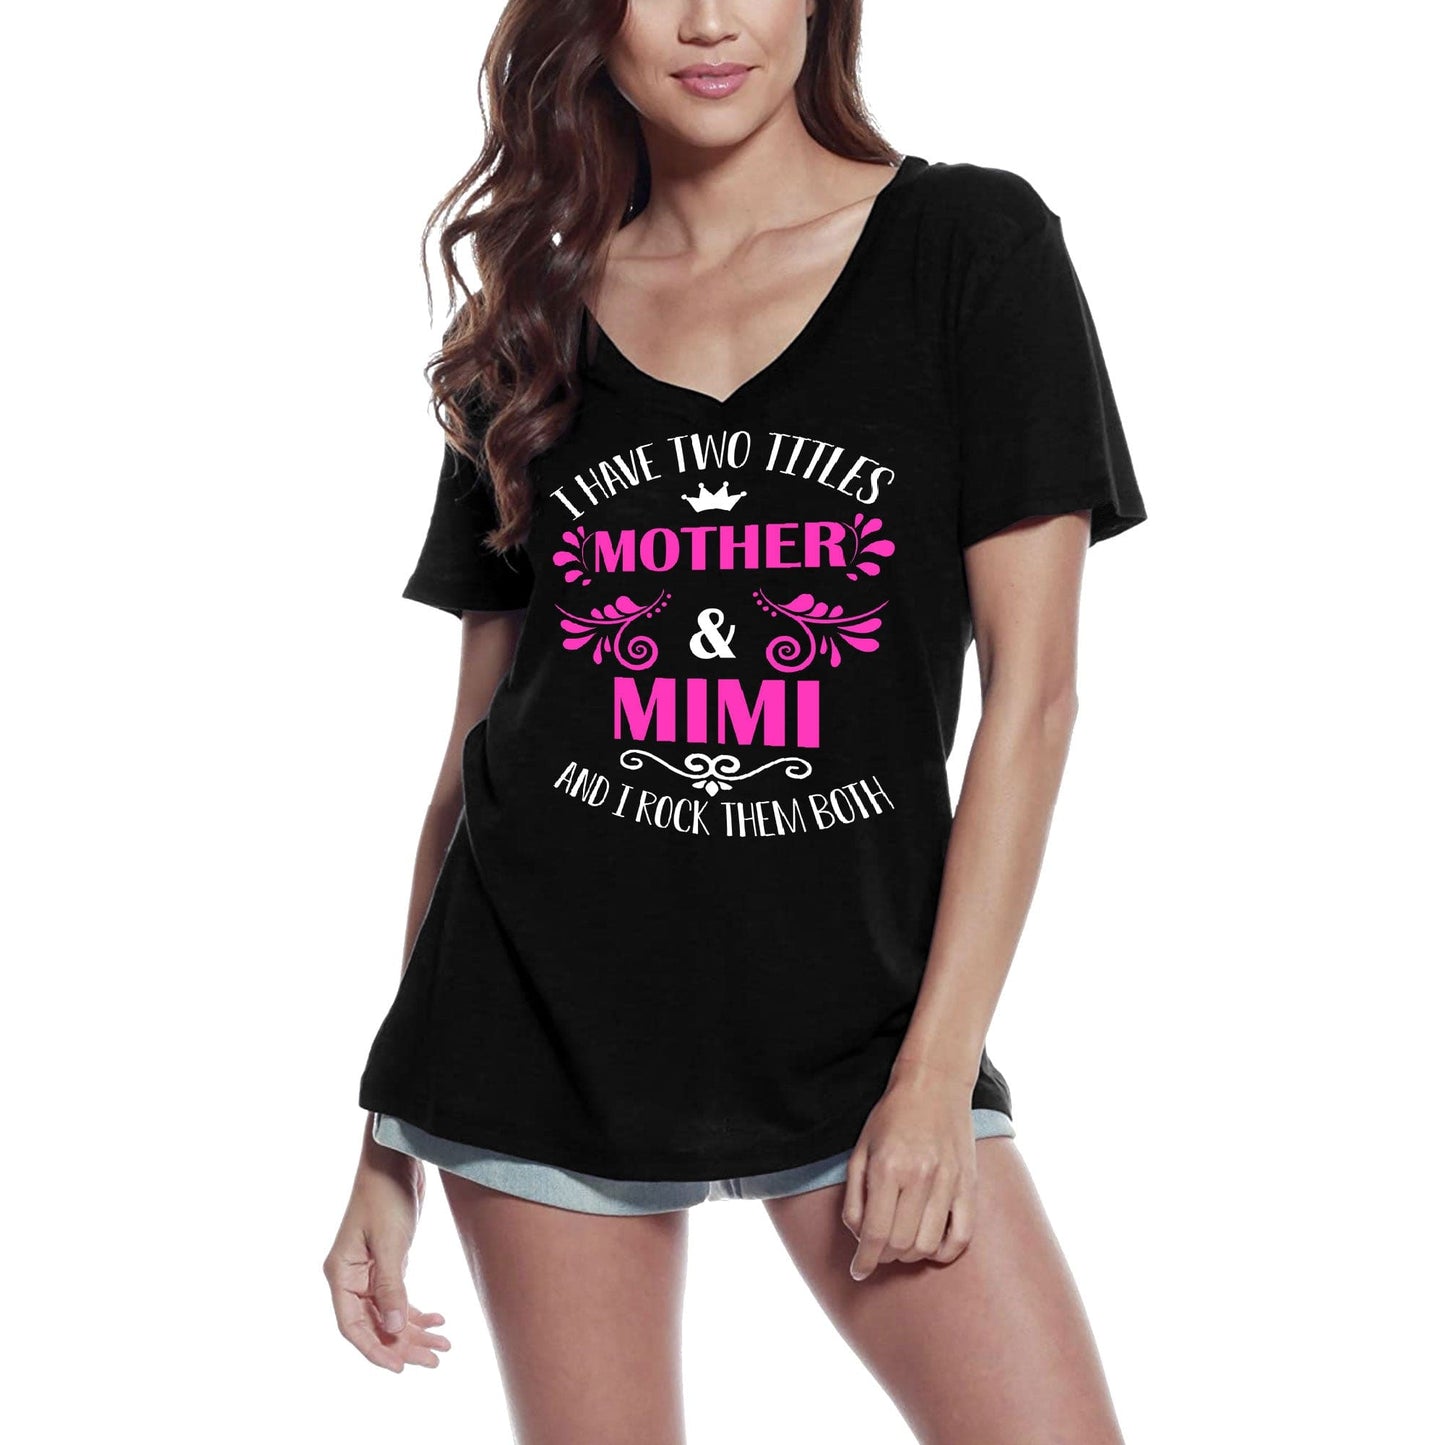 ULTRABASIC Damen-T-Shirt „I Have 2 Titles Mother and Mimi and I Rock Them Both“.